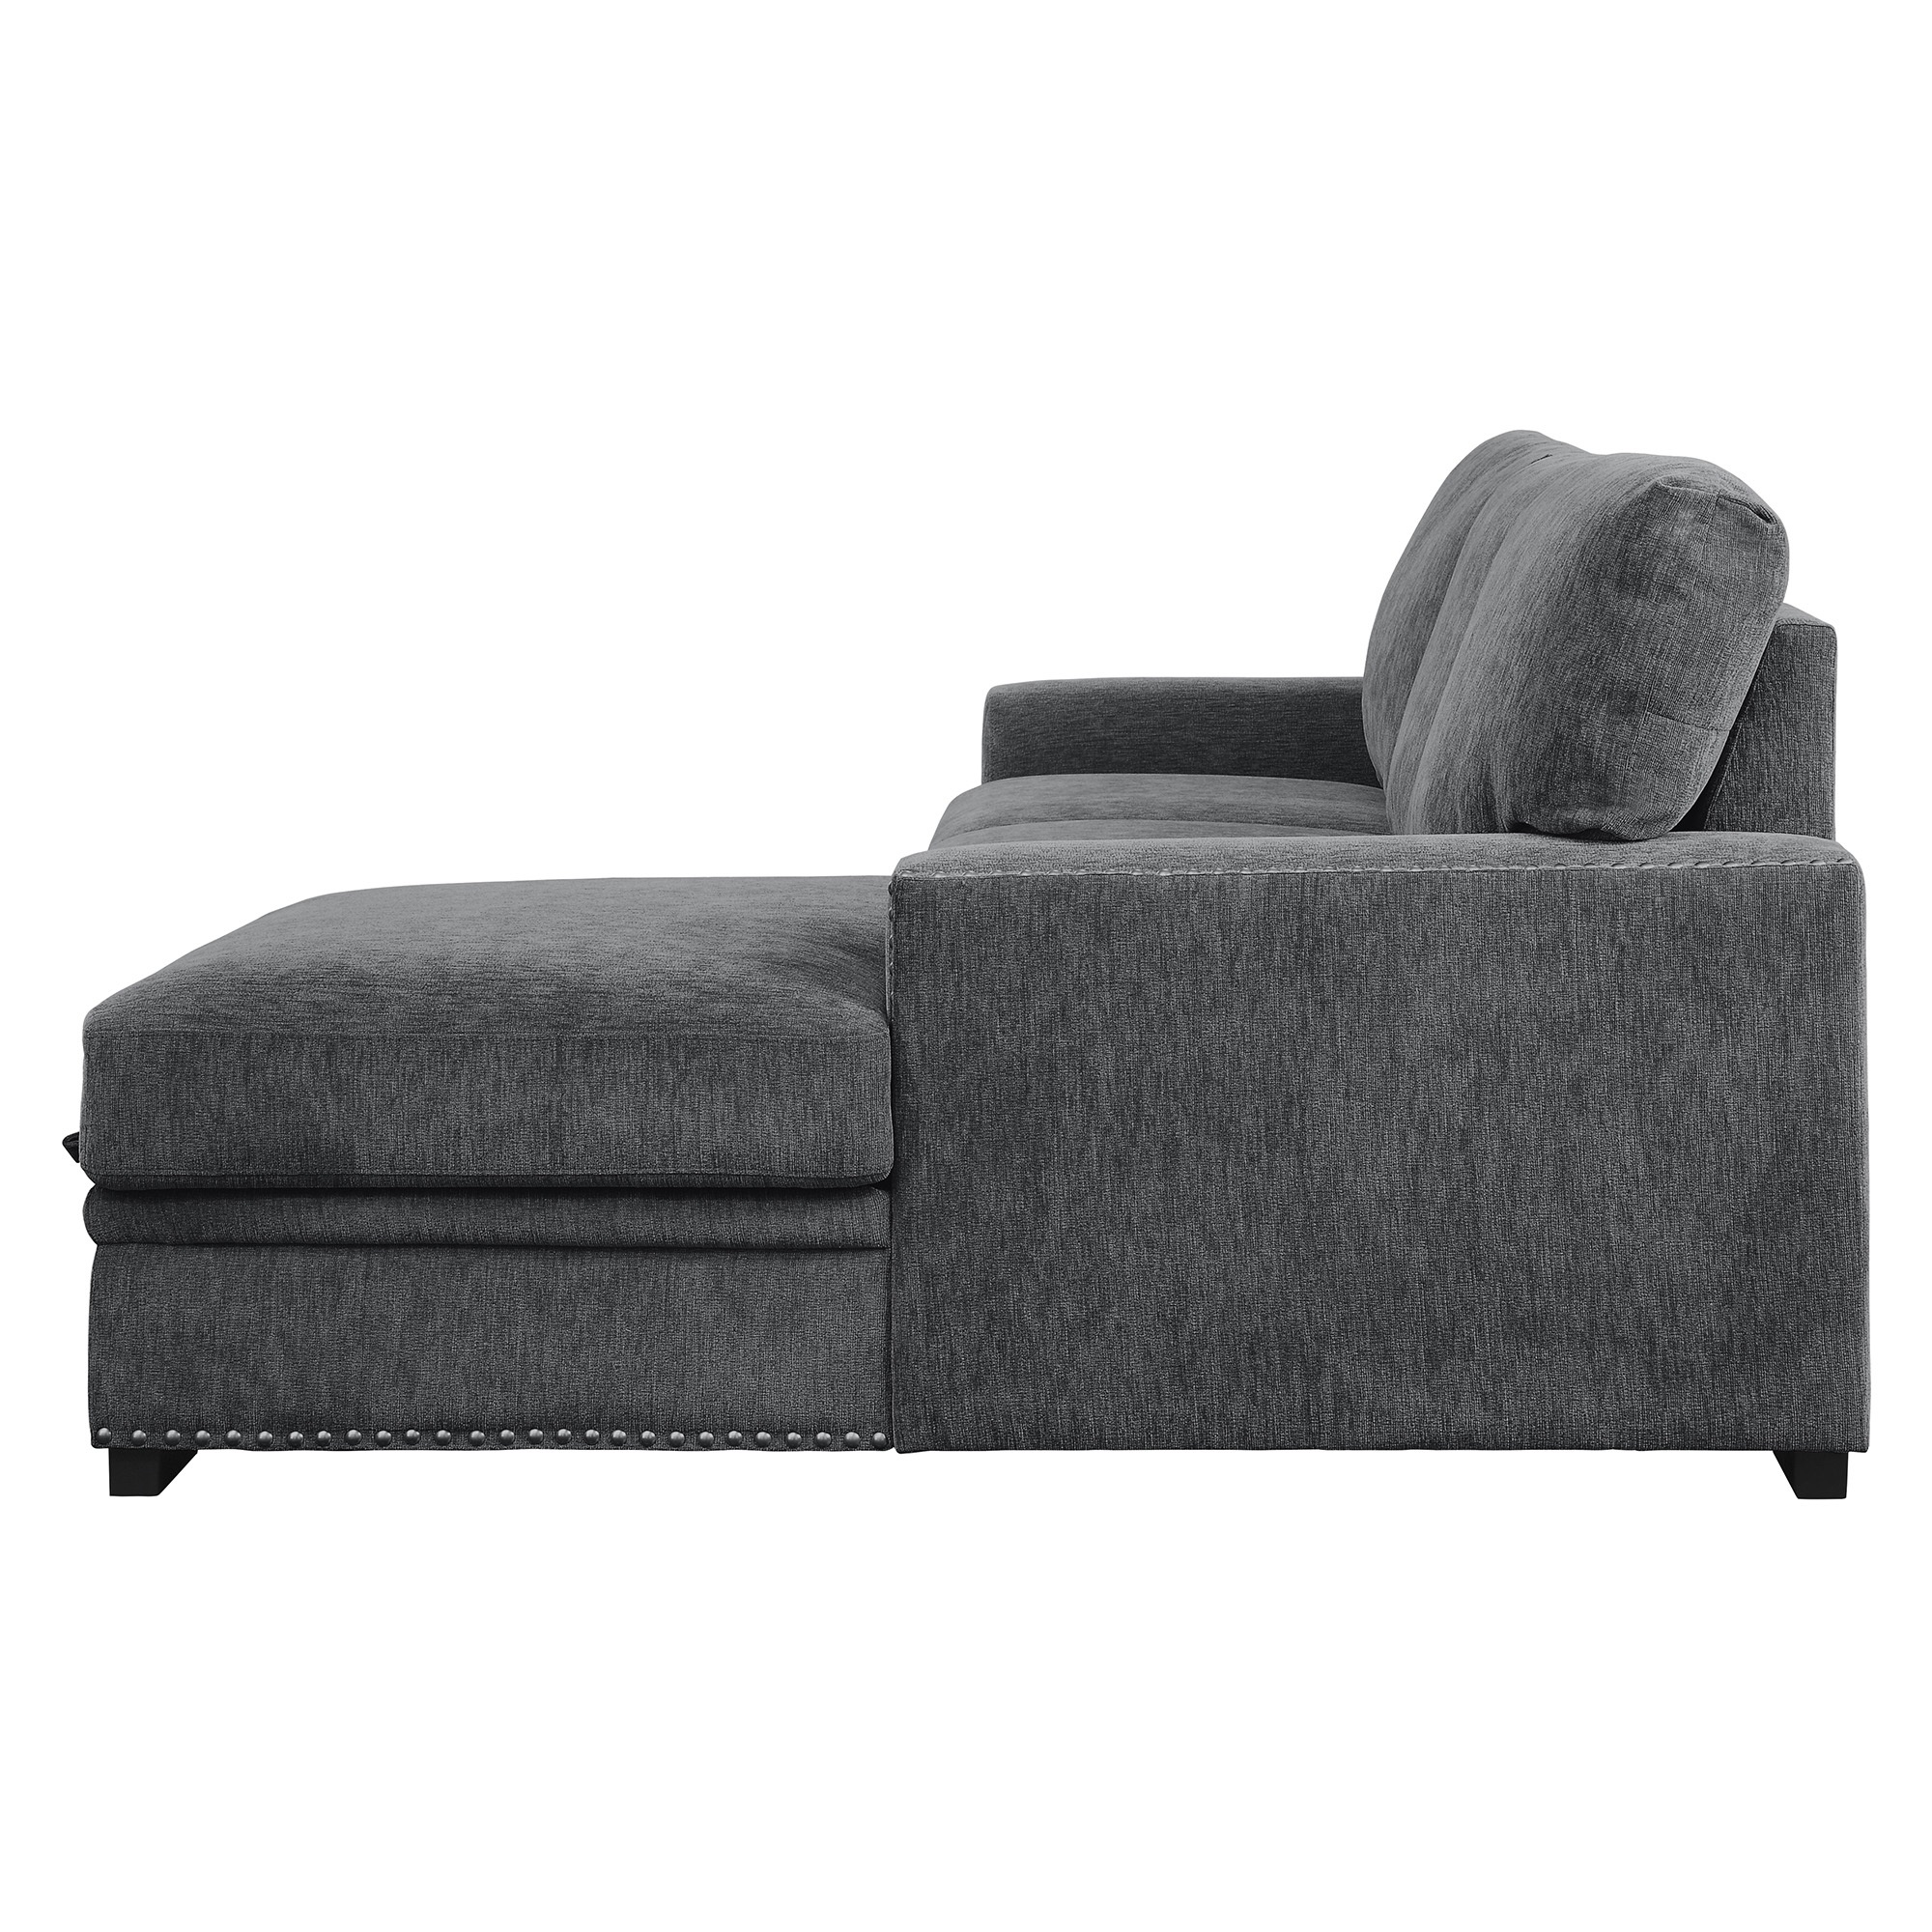 Lazzara Home Driggs 96 in. W Chenille Upholstery 2-Piece Sectional Sofa in Charcoal w/ Pull-out Bed and Right Chaise with Hidden Storage